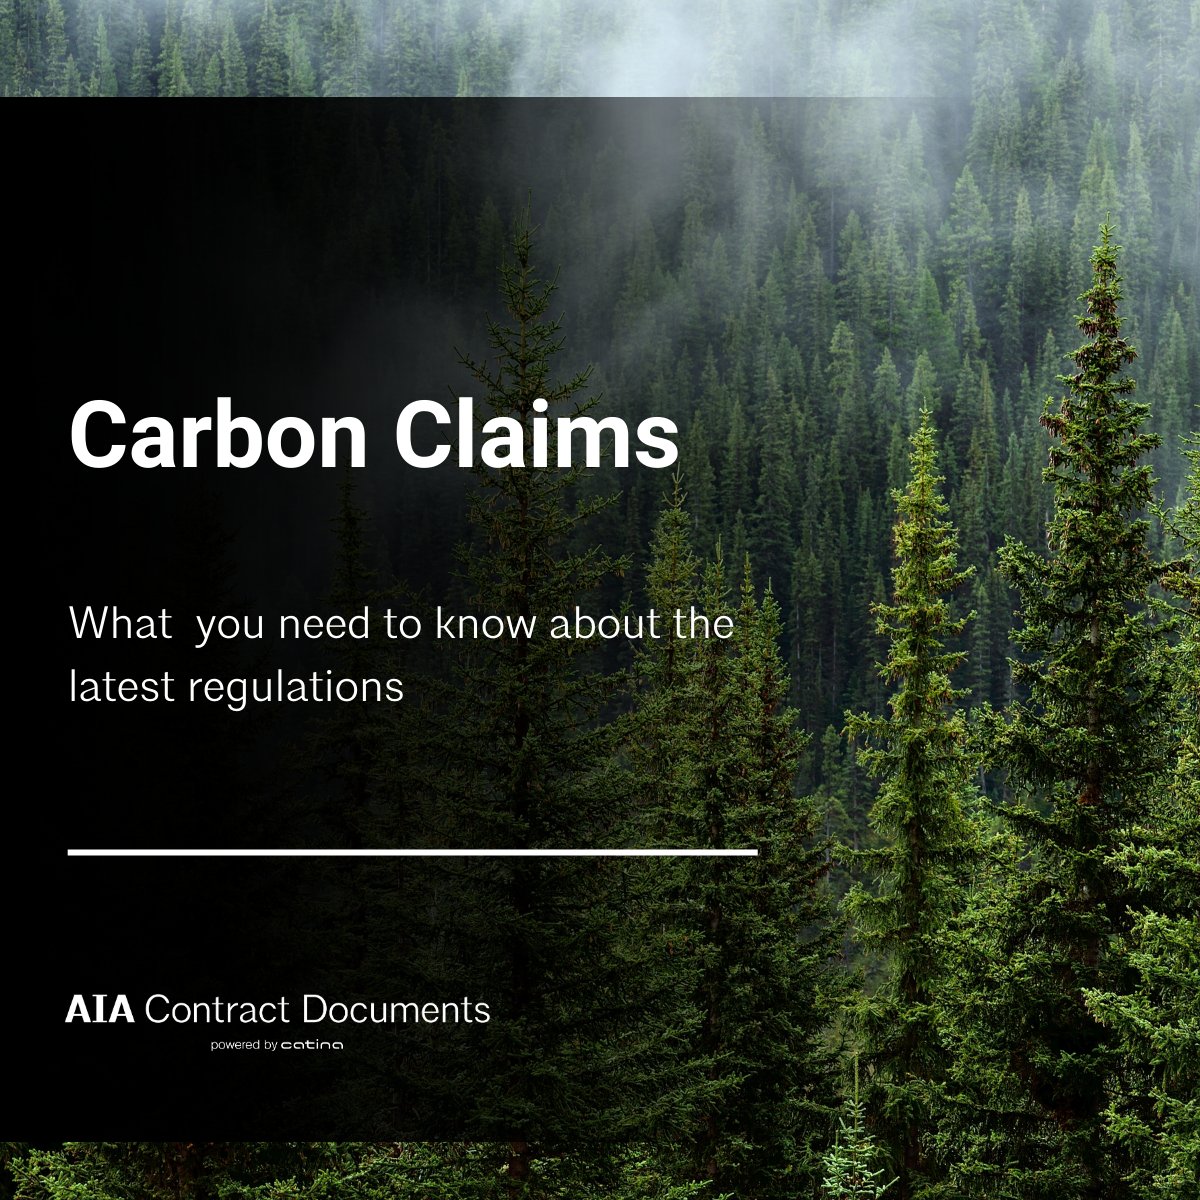 The Voluntary Carbon Market Disclosures Act requires entities to disclose information about their carbon claims and the basis for those claims. For California-based building professionals, understanding AB 1305 is a must: bit.ly/3Js3YOh #CarbonClaims #construction